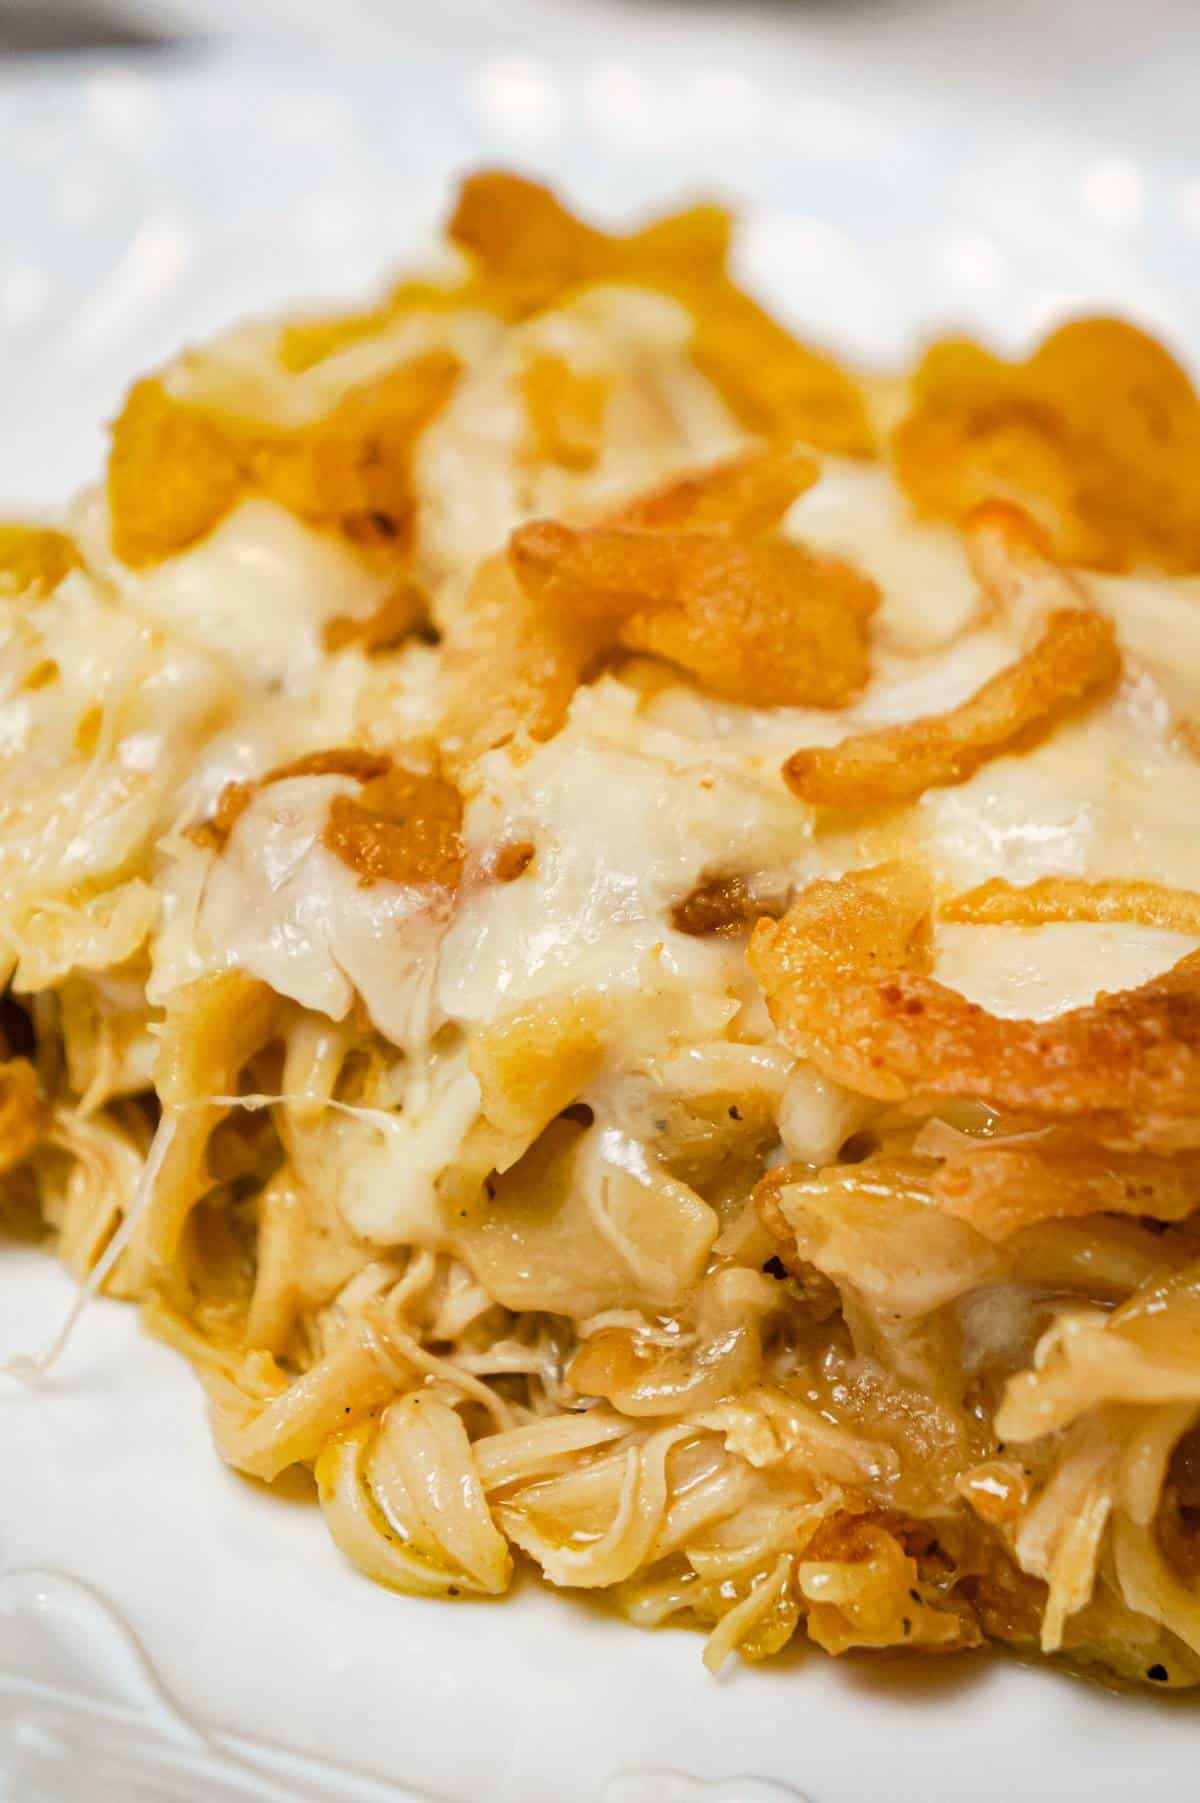 French Onion Chicken Casserole is a hearty casserole recipe loaded with shredded chicken, egg noodles, onion soup mix, cream of chicken soup, mozzarella cheese, parmesan cheese and French's crispy fried onions.